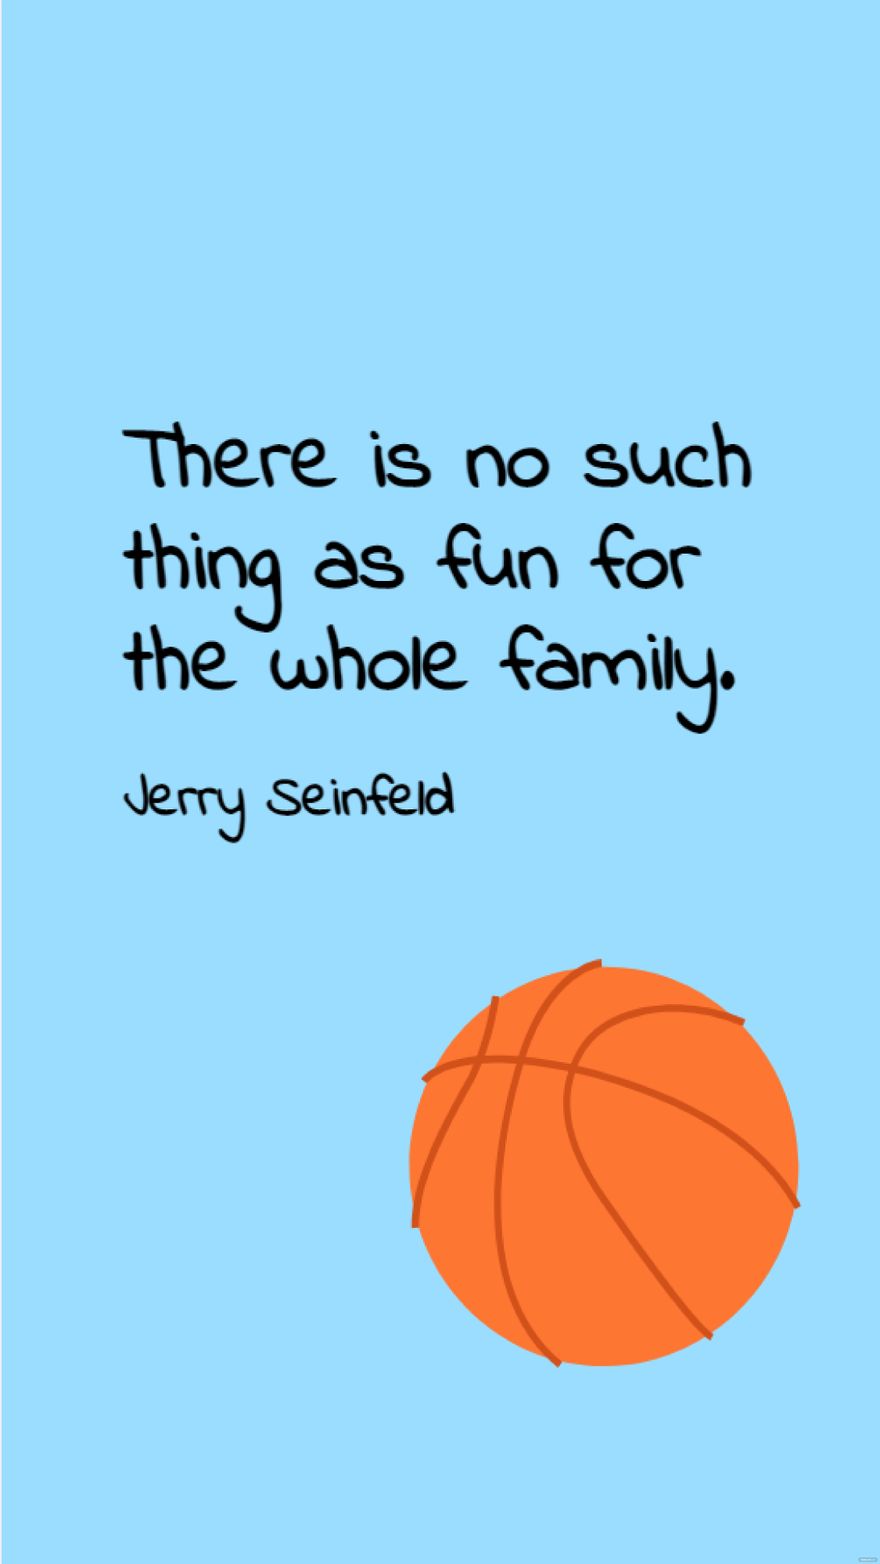 Free Jerry Seinfeld - There is no such thing as fun for the whole family. in JPG